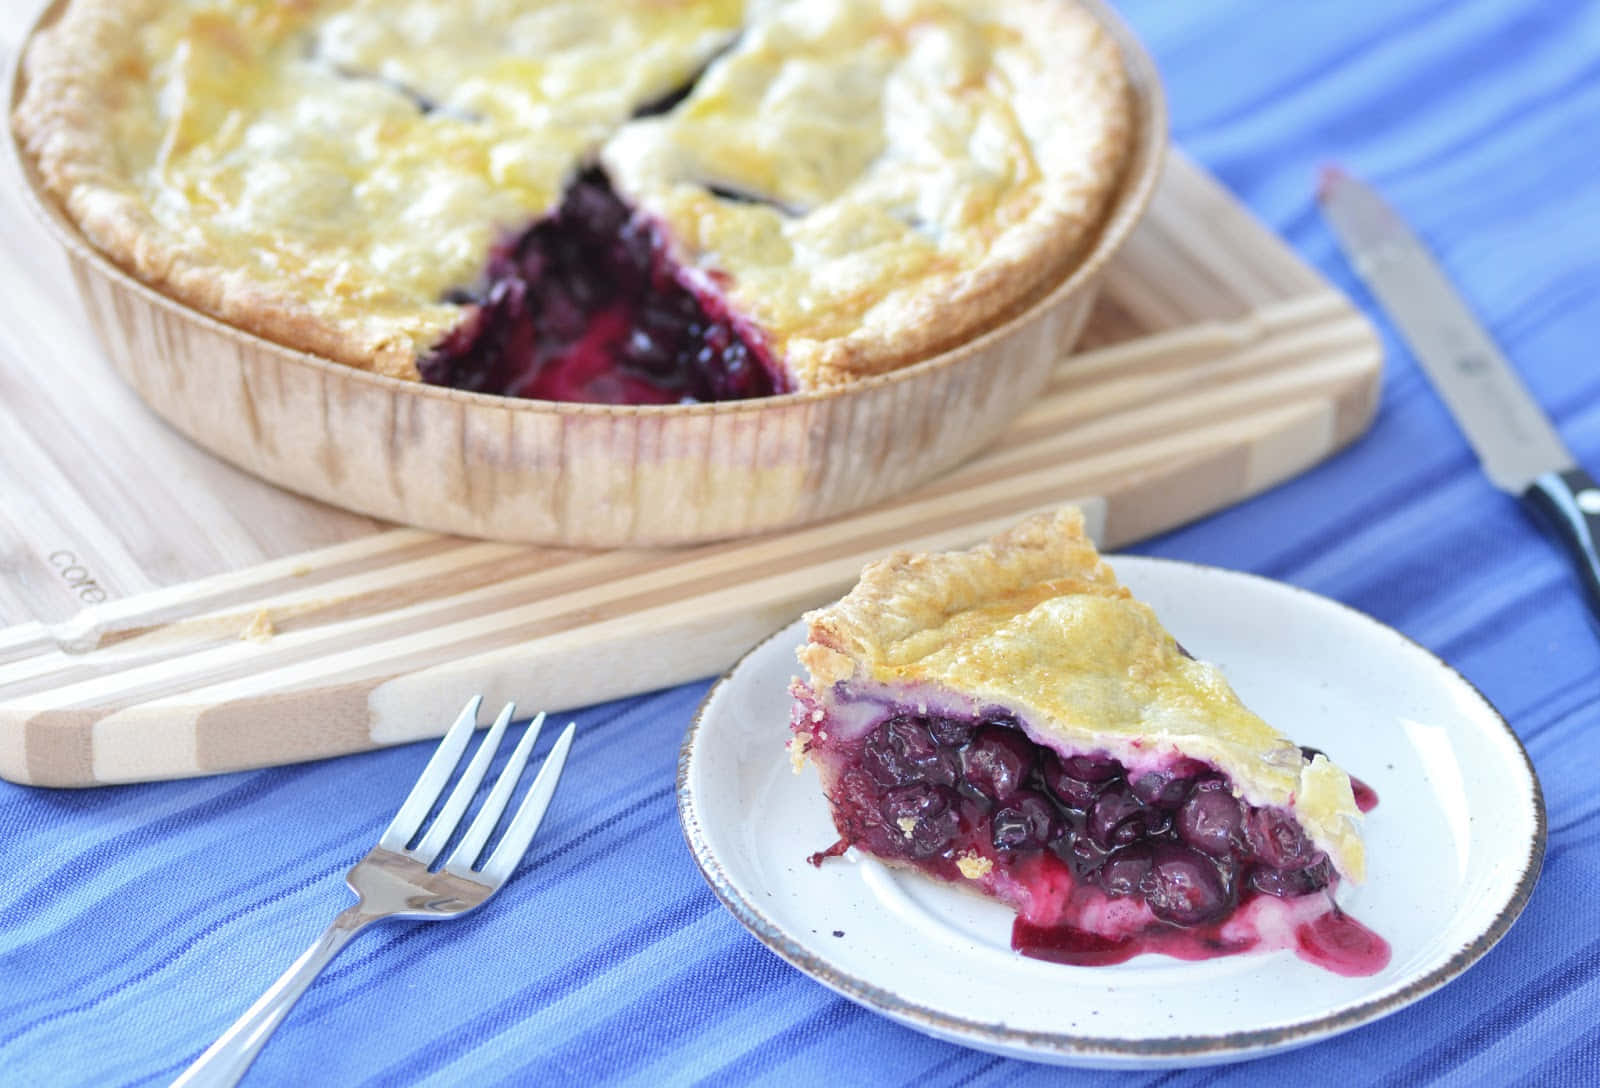 A delicious blueberry pie, freshly baked to perfection Wallpaper